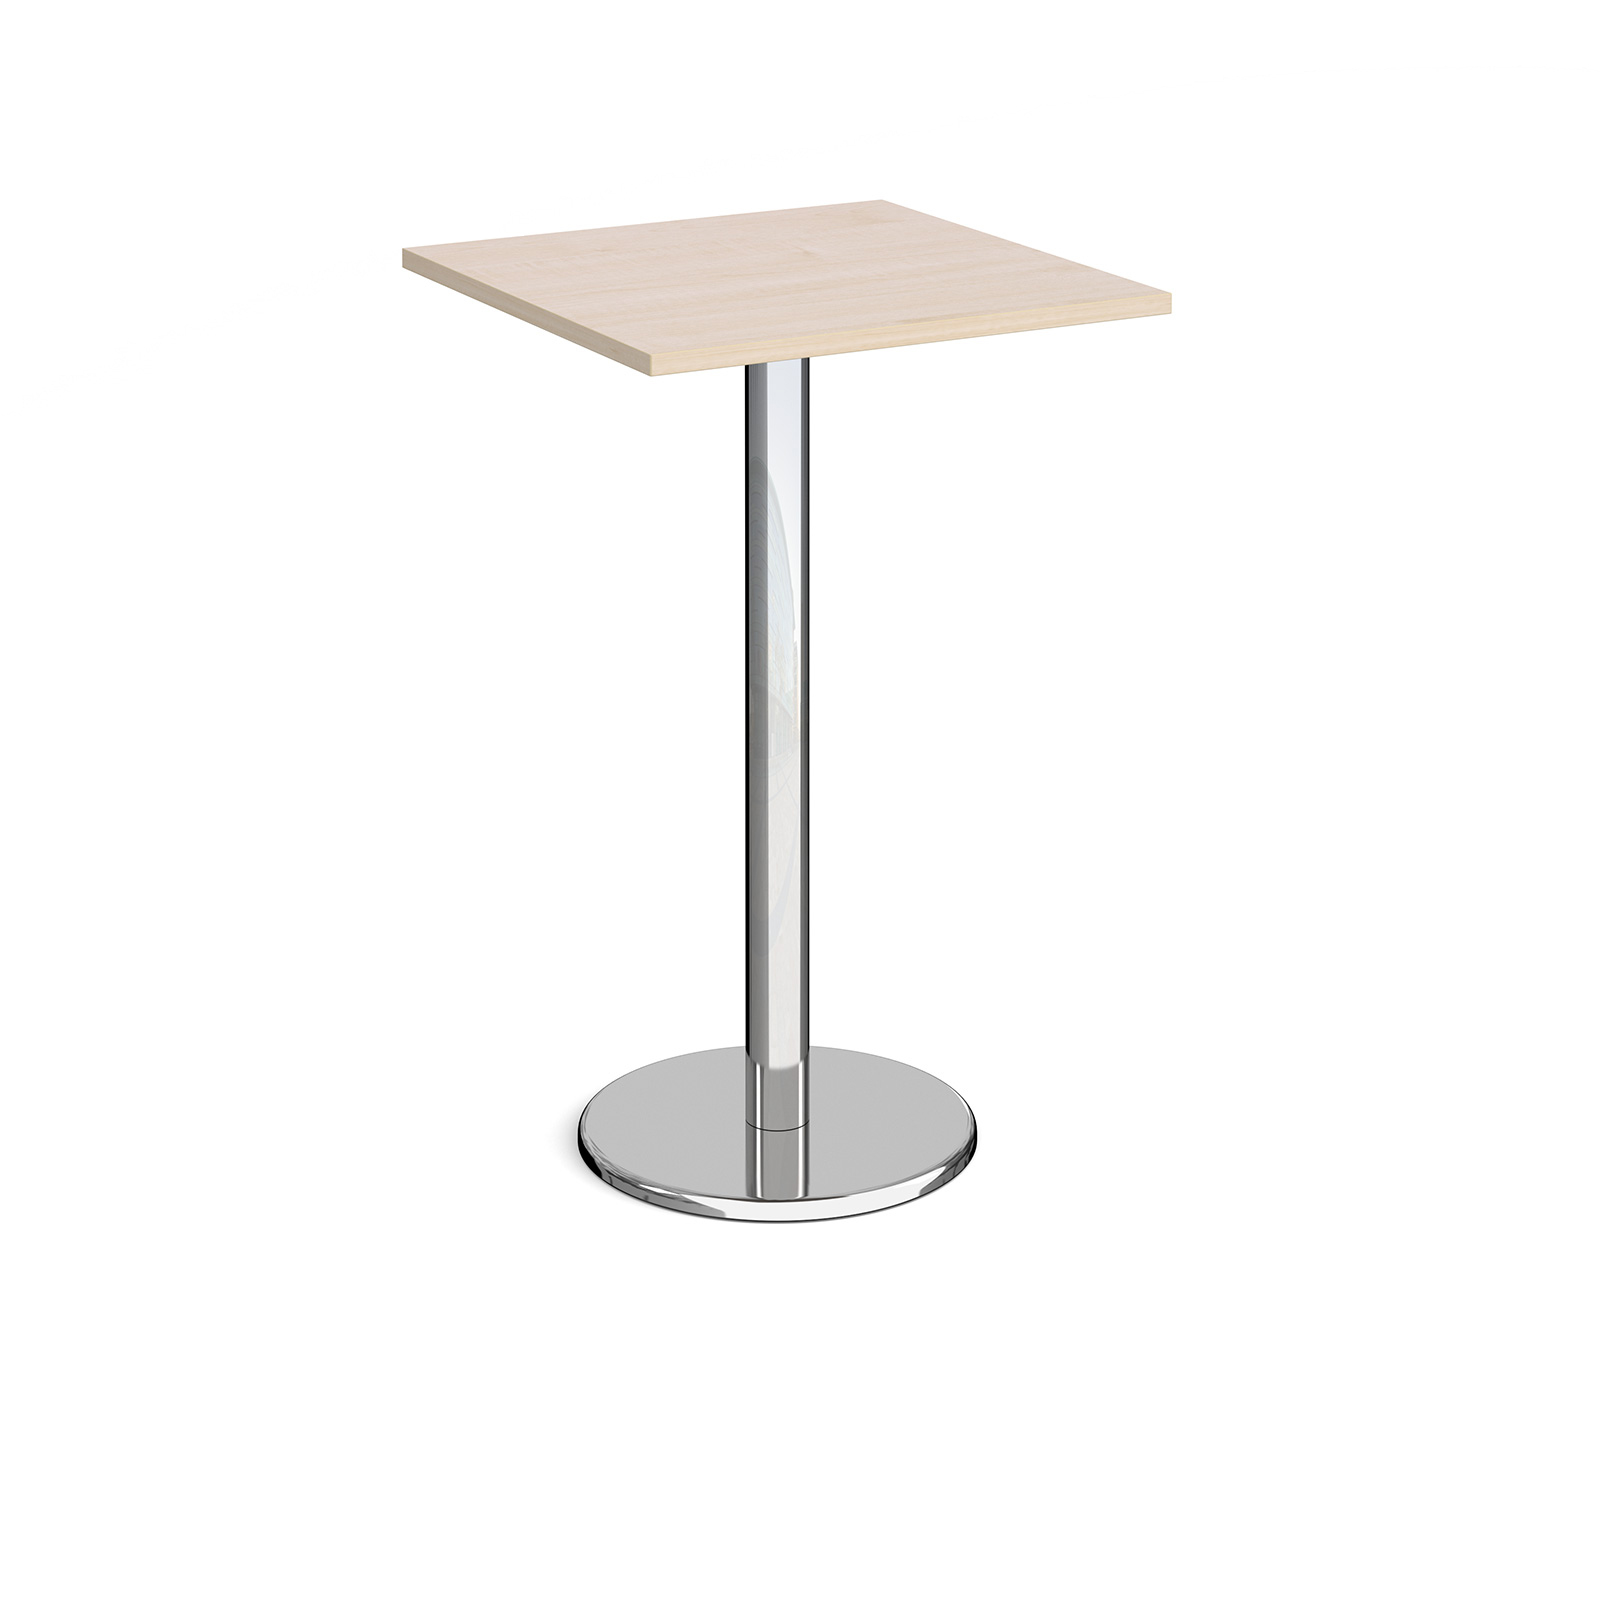 Pisa square poseur table with round chrome base 700mm - maple